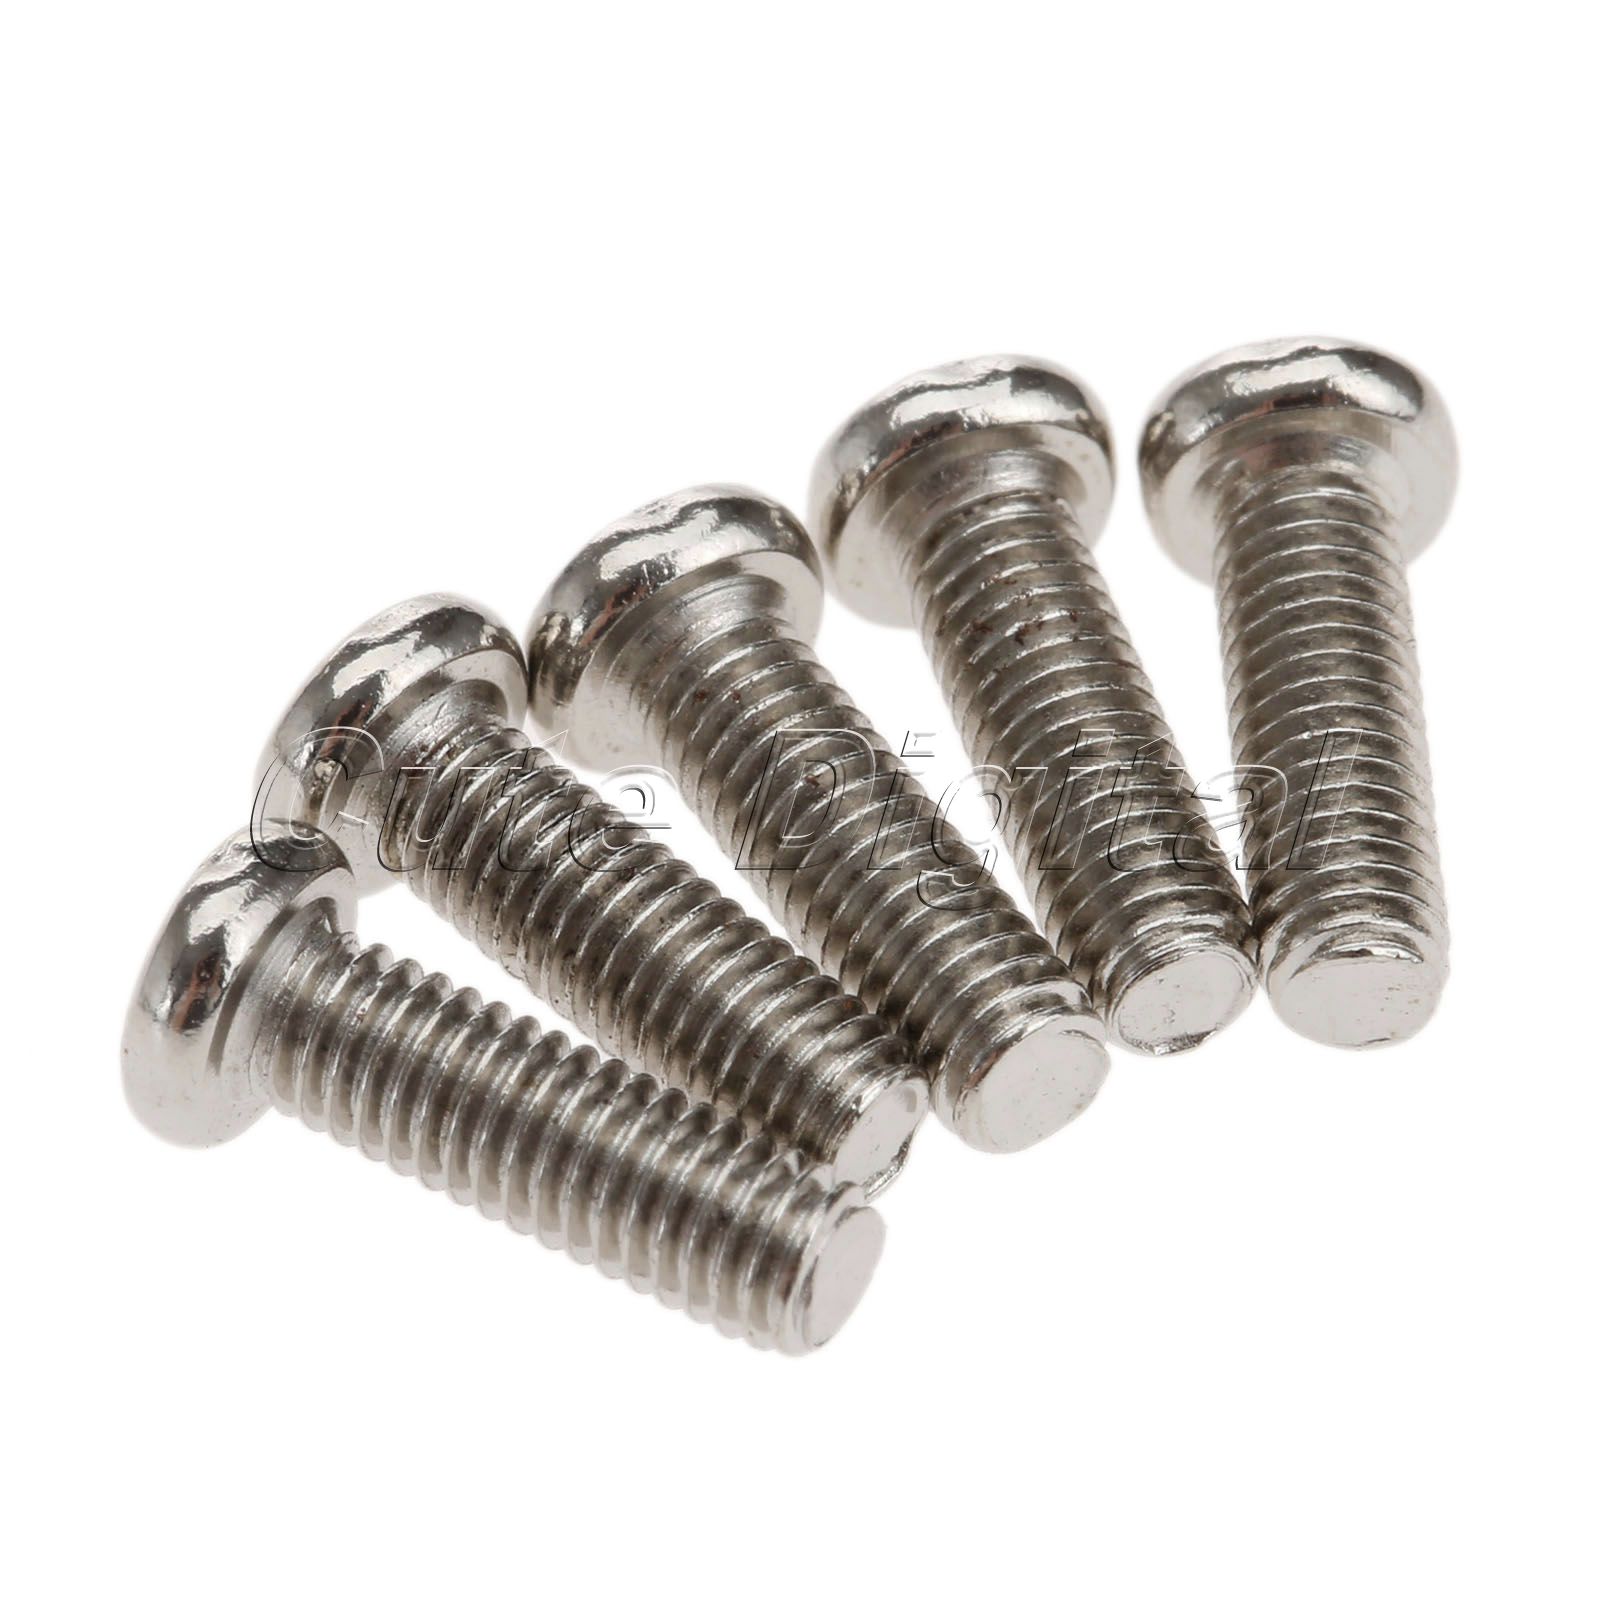 50Pcs Phillips Plain Screws M3x10mm Stainless Steel Screws and Bolts ...